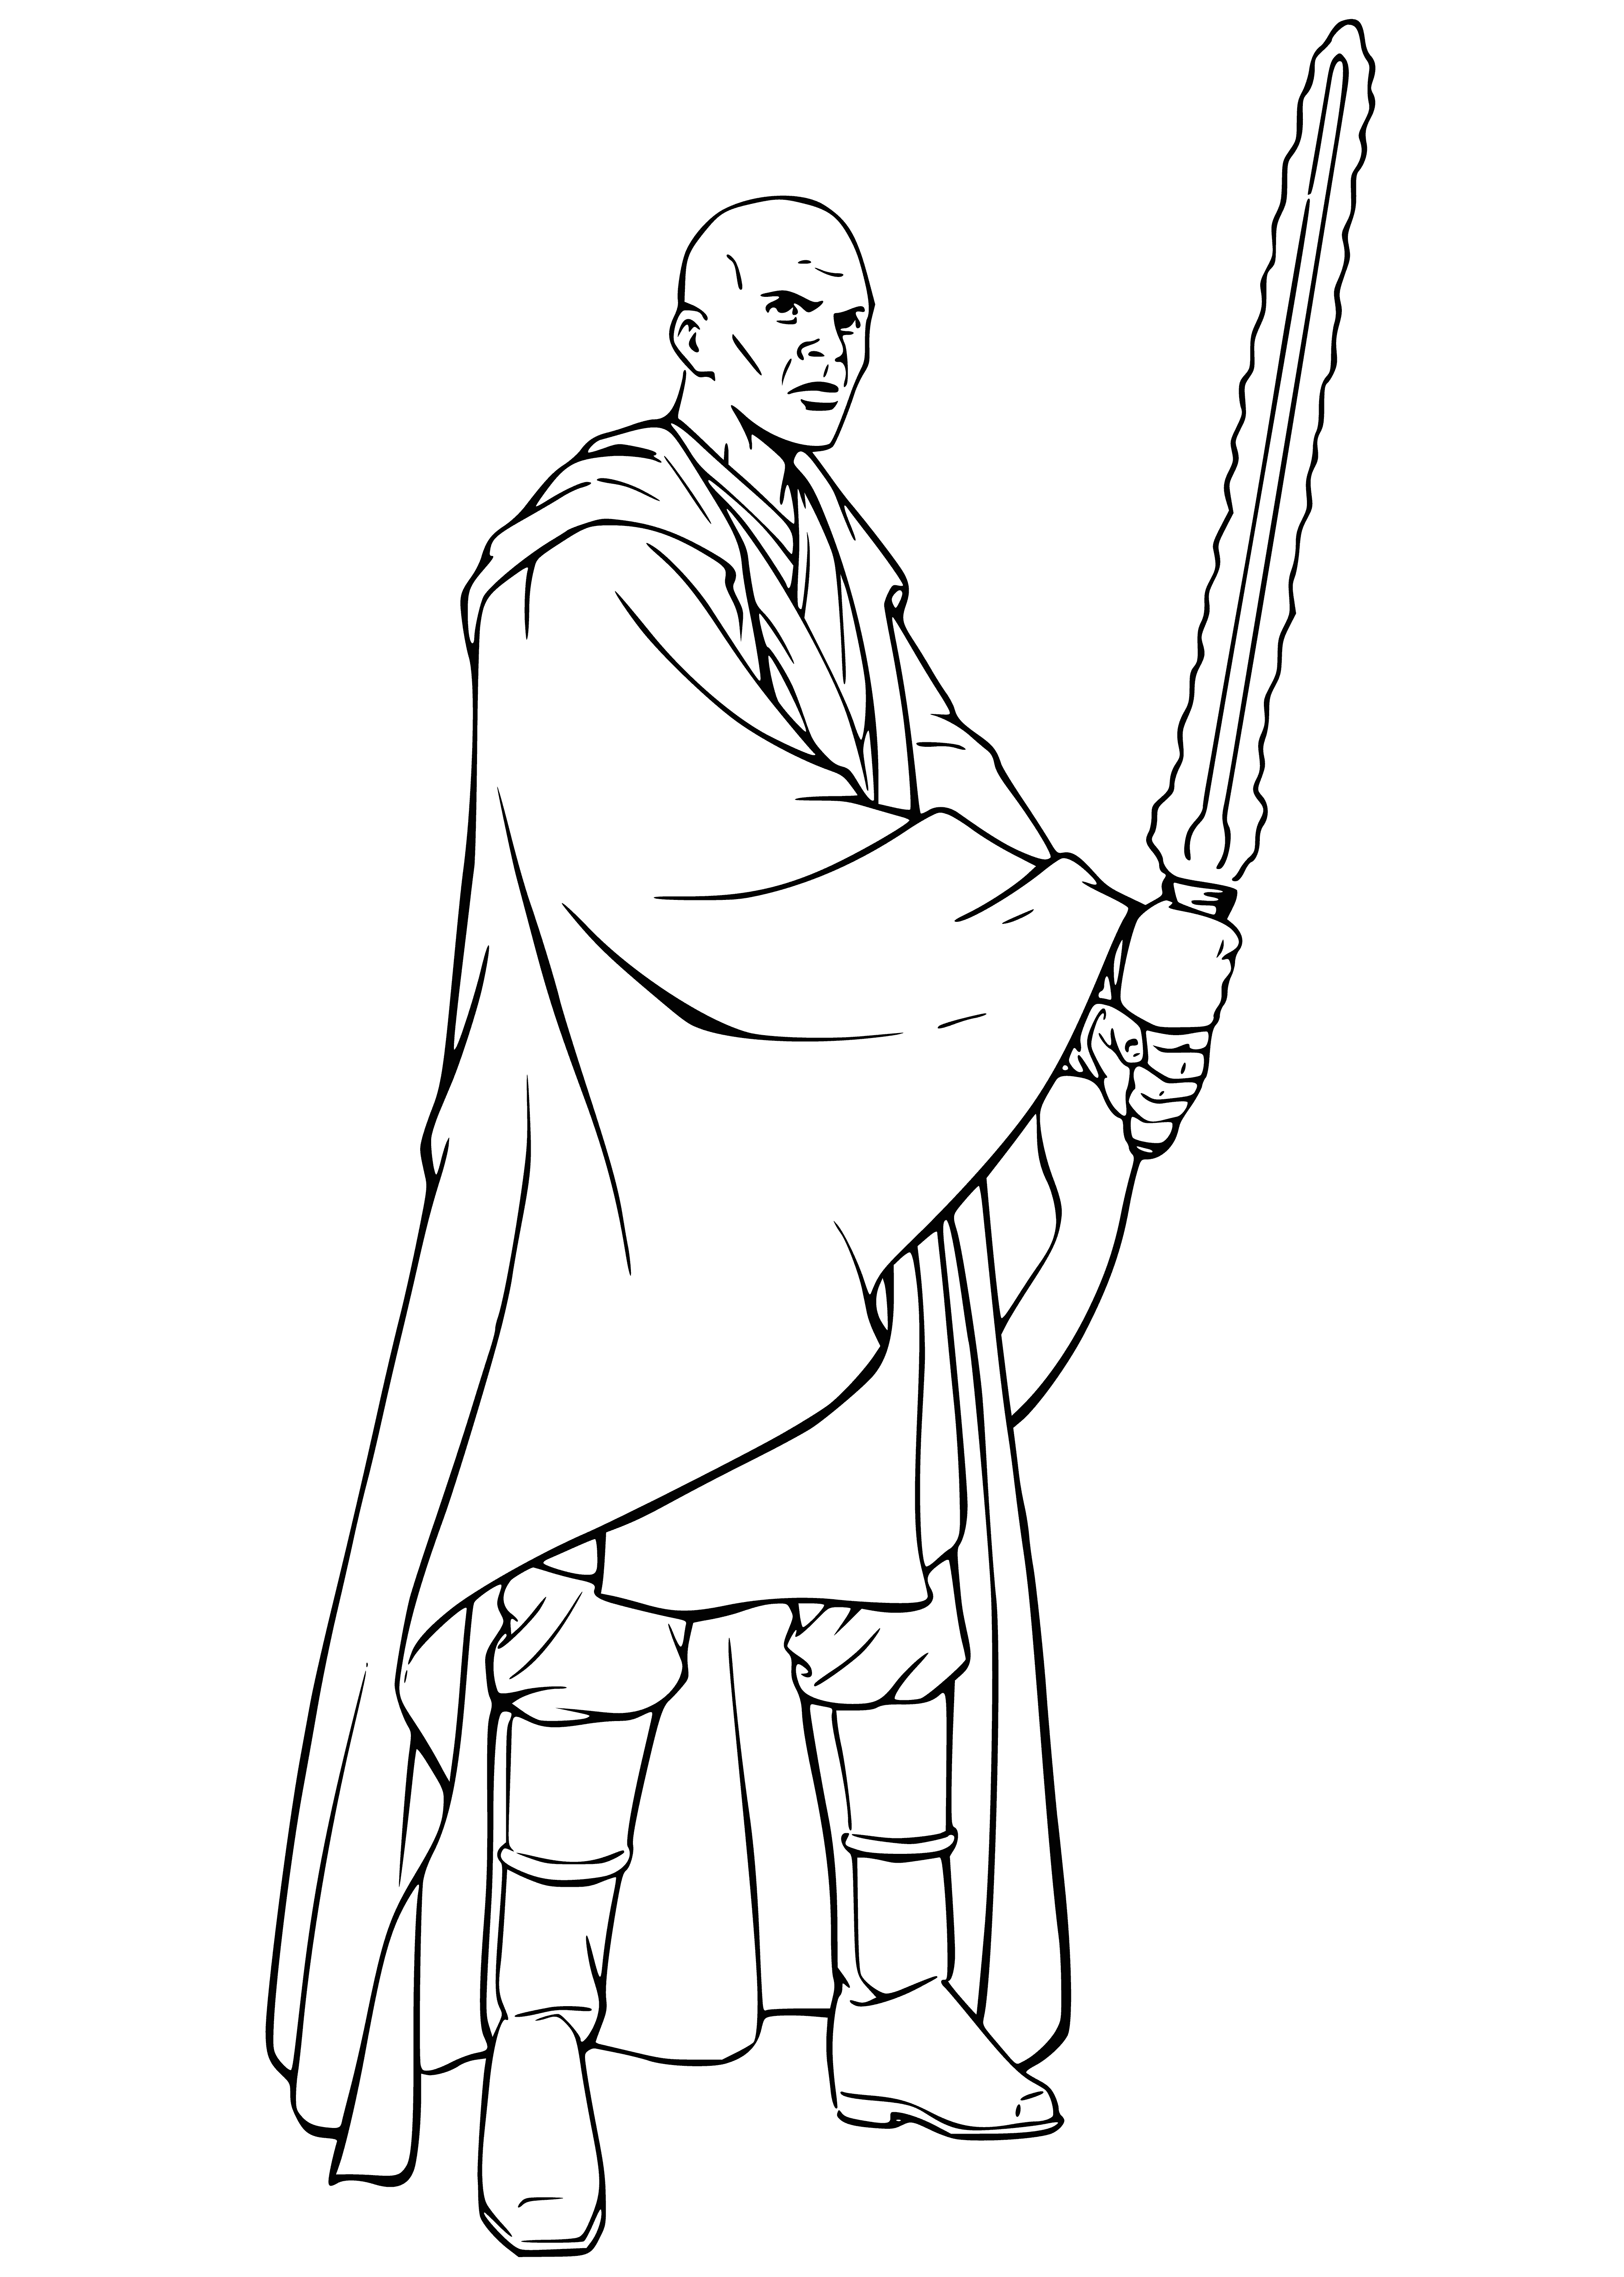 coloring page: Jedi Master Mace Windu is a skilled warrior and powerful Force user with a purple lightsaber. He is respected in the Jedi Order and trusted by Anakin Skywalker, whom he helps to defeat Darth Sidious.